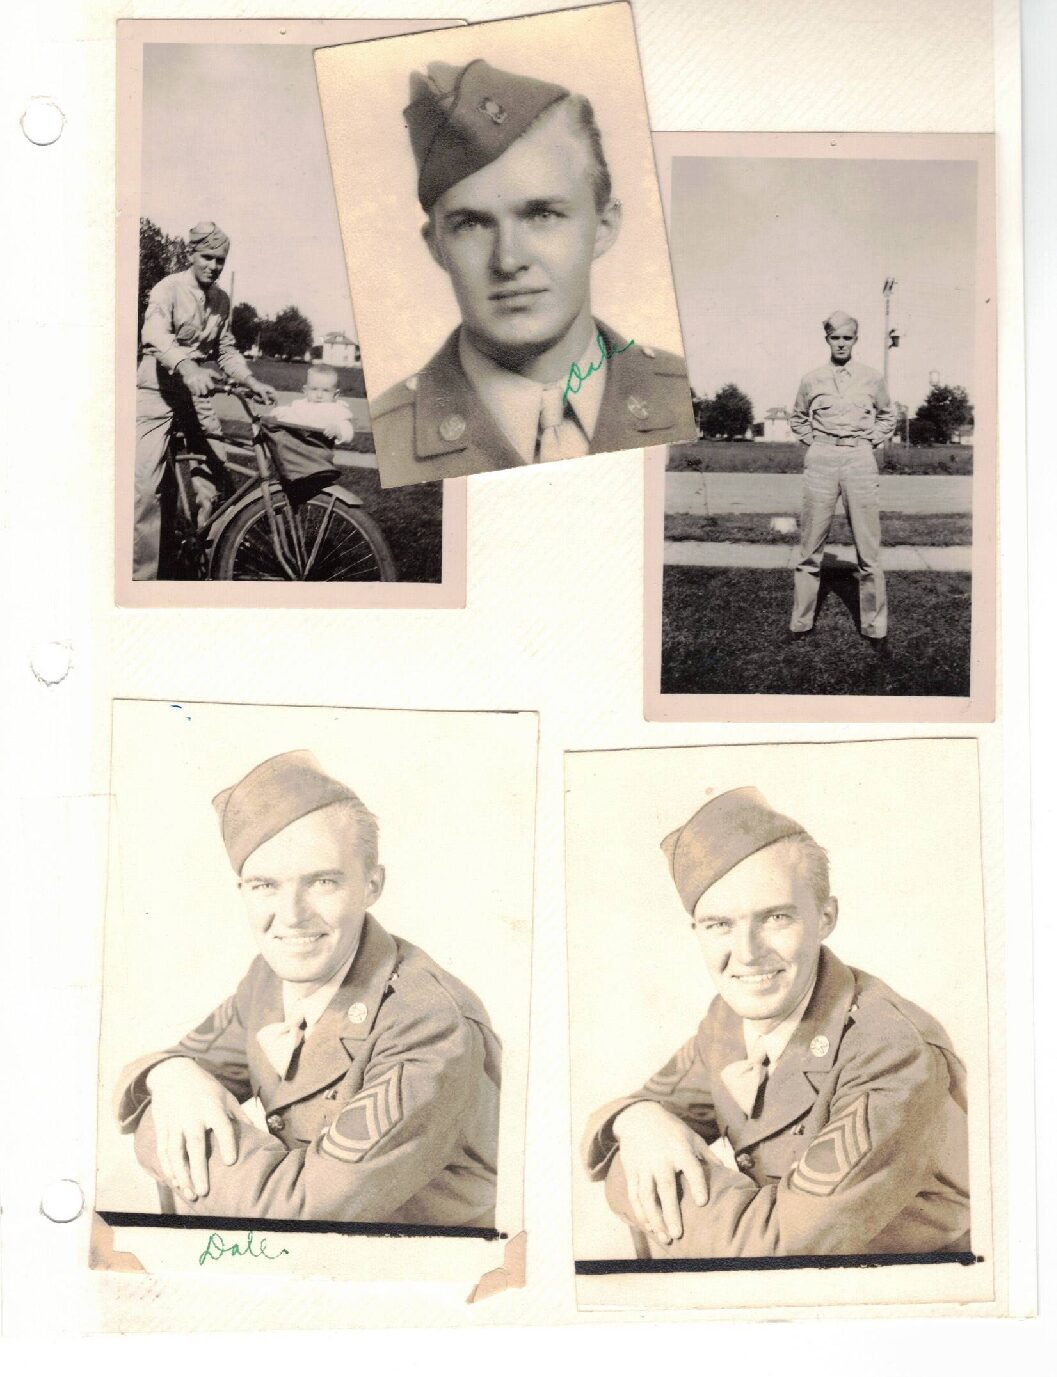 Clark, Dale military photo collage